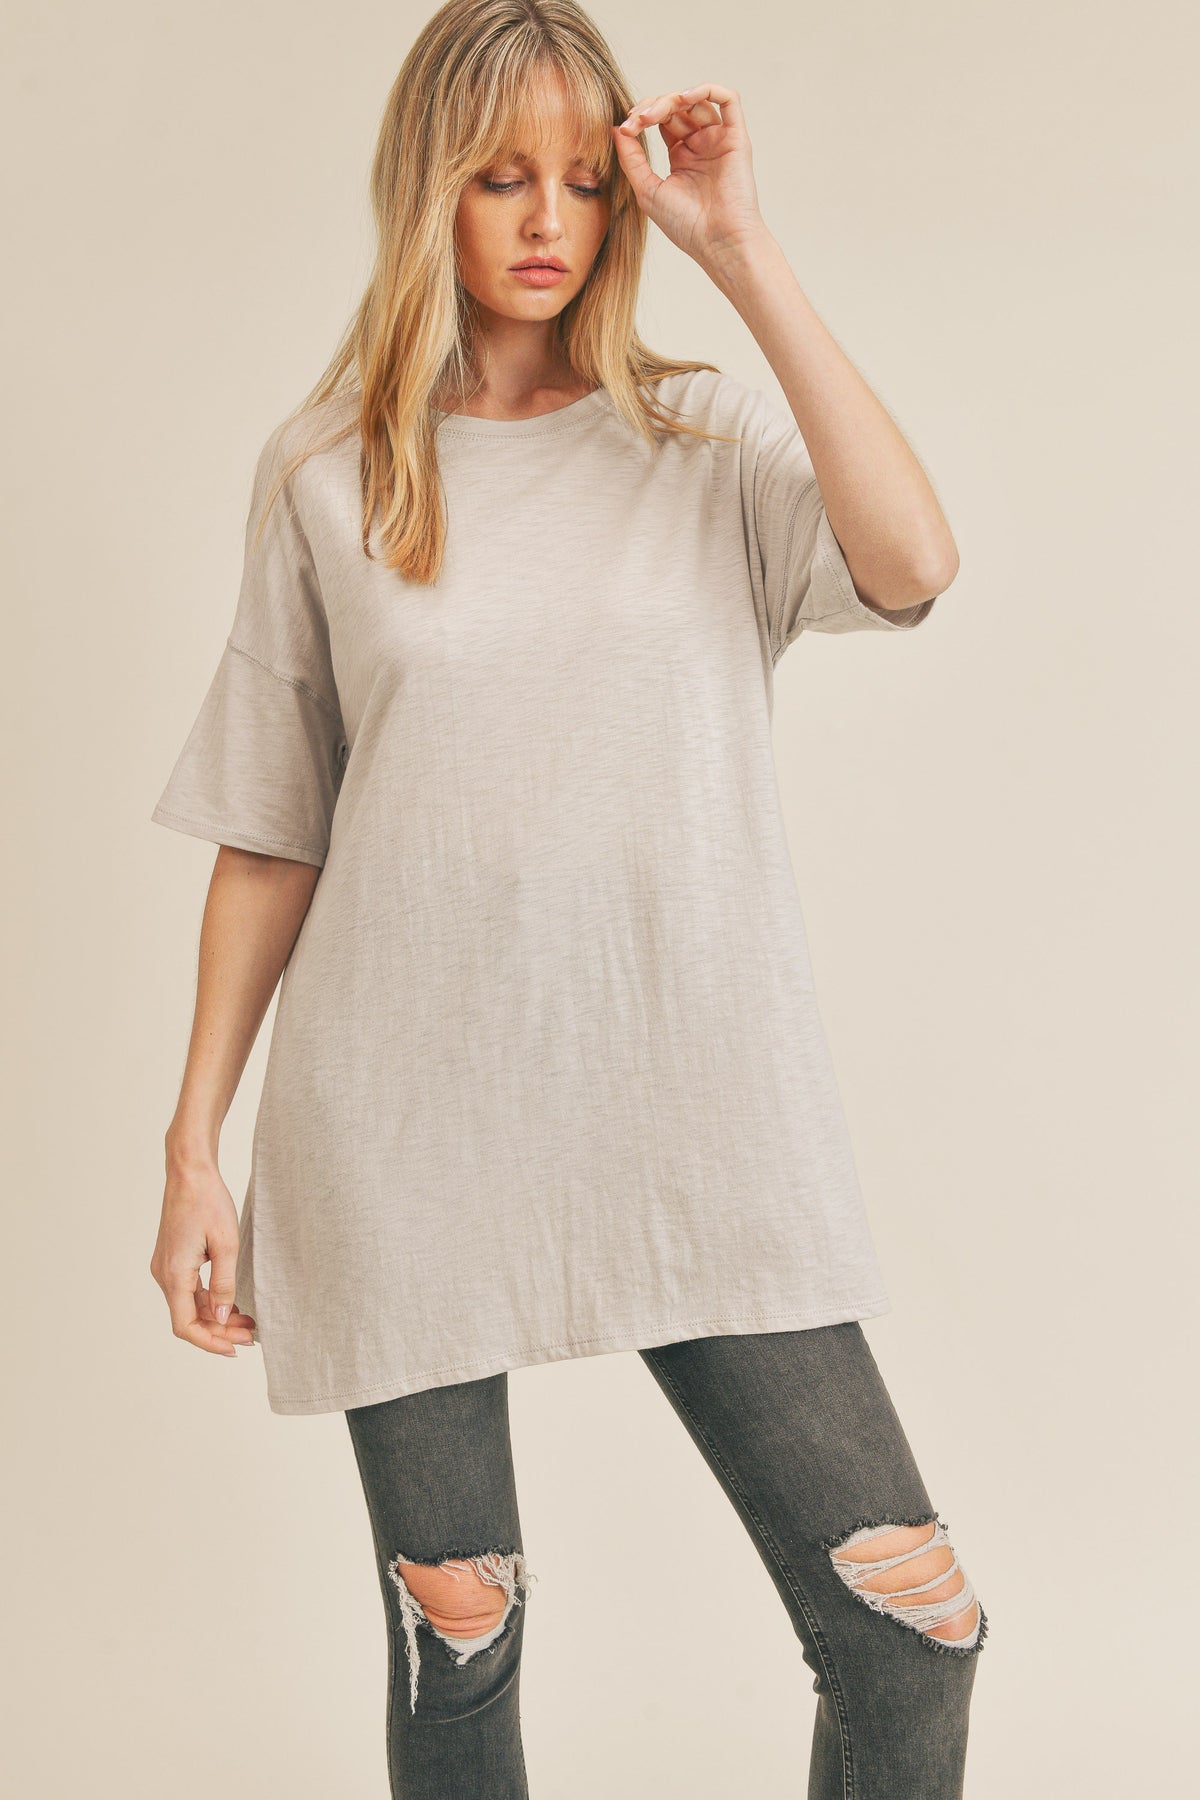 Sealy Tunic Top